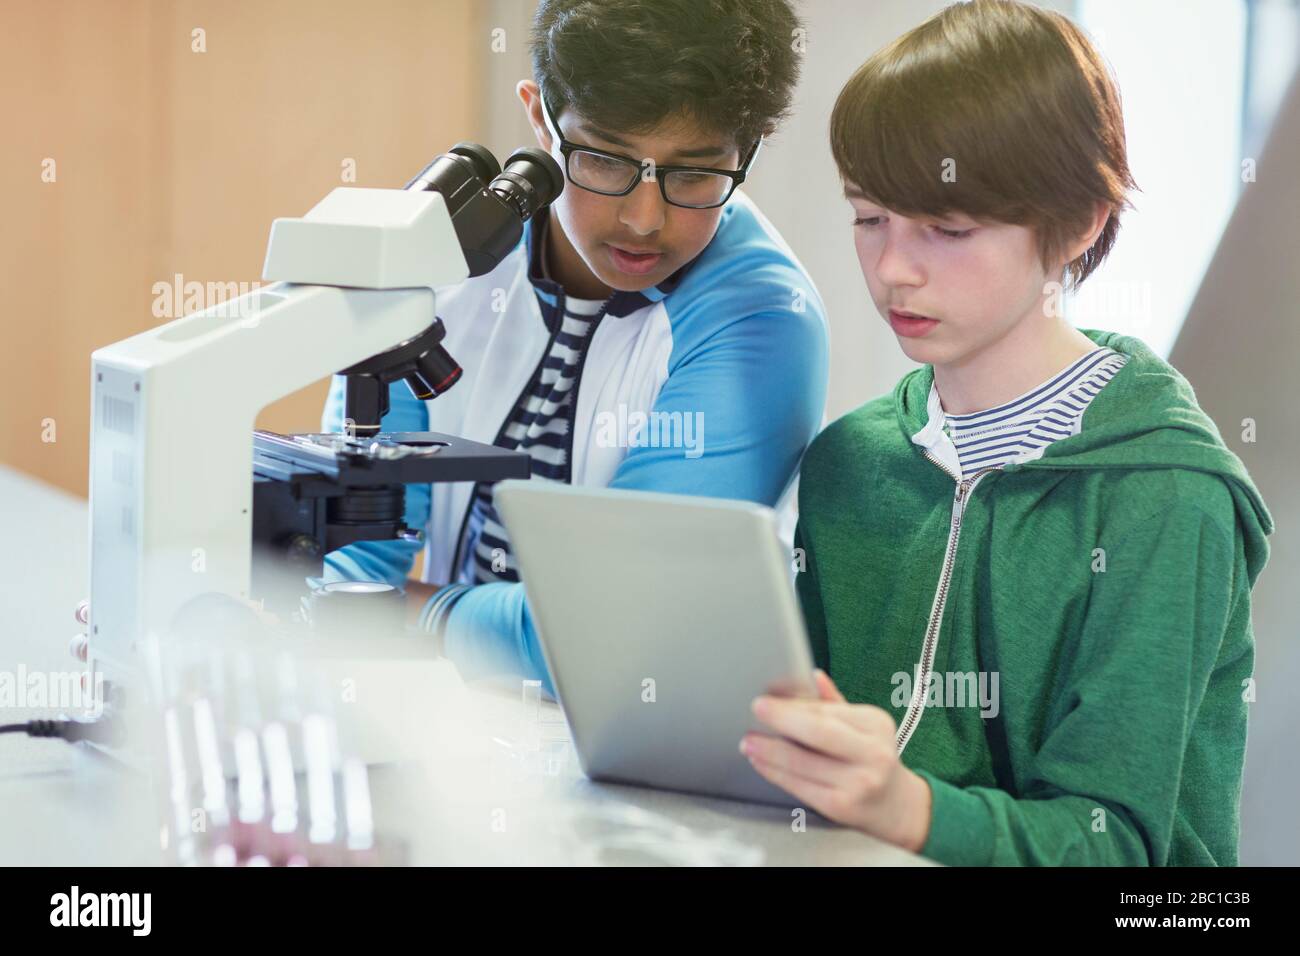 Focused boy students using digital tablet at microscope in laboratory classroom Stock Photo